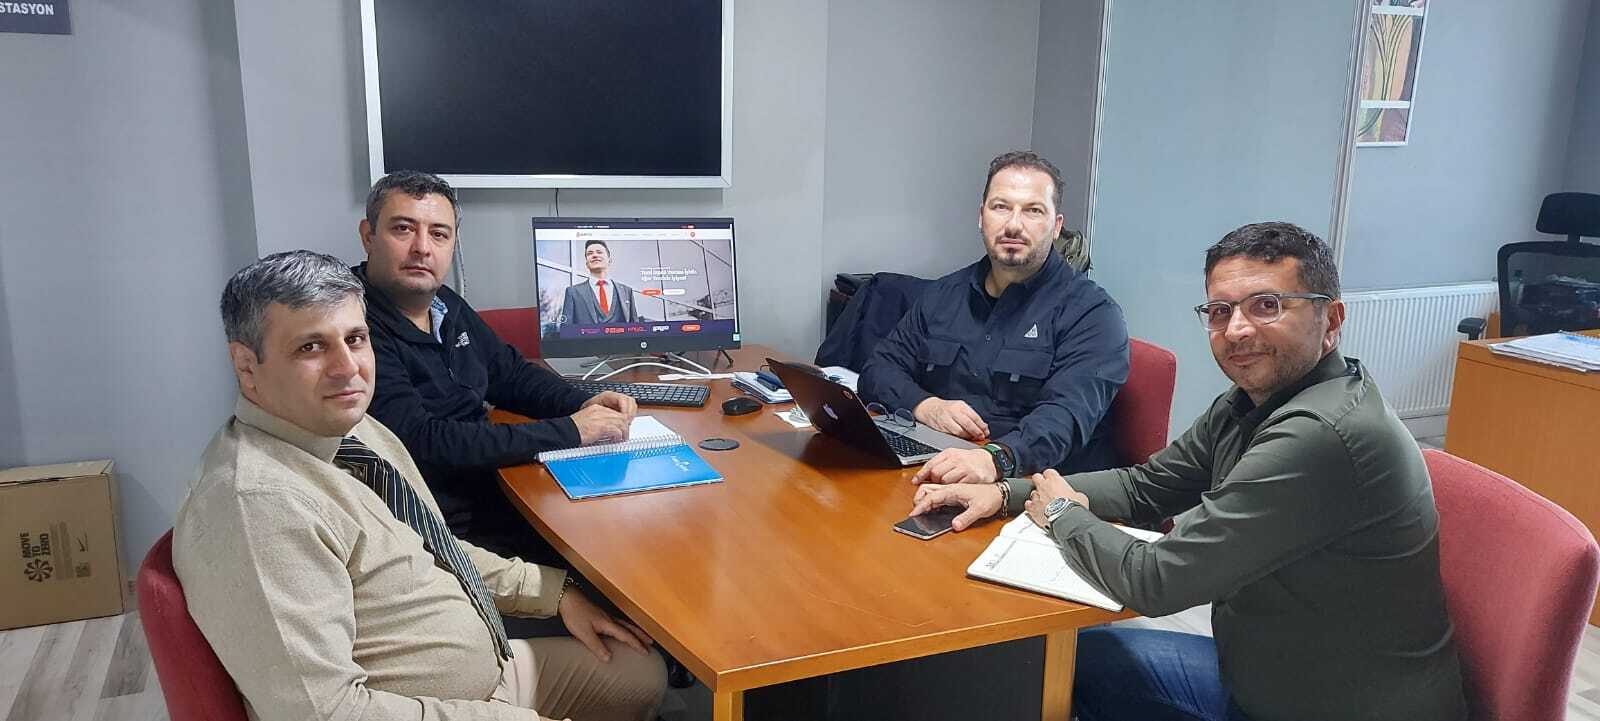 New projects were discussed with our business partners